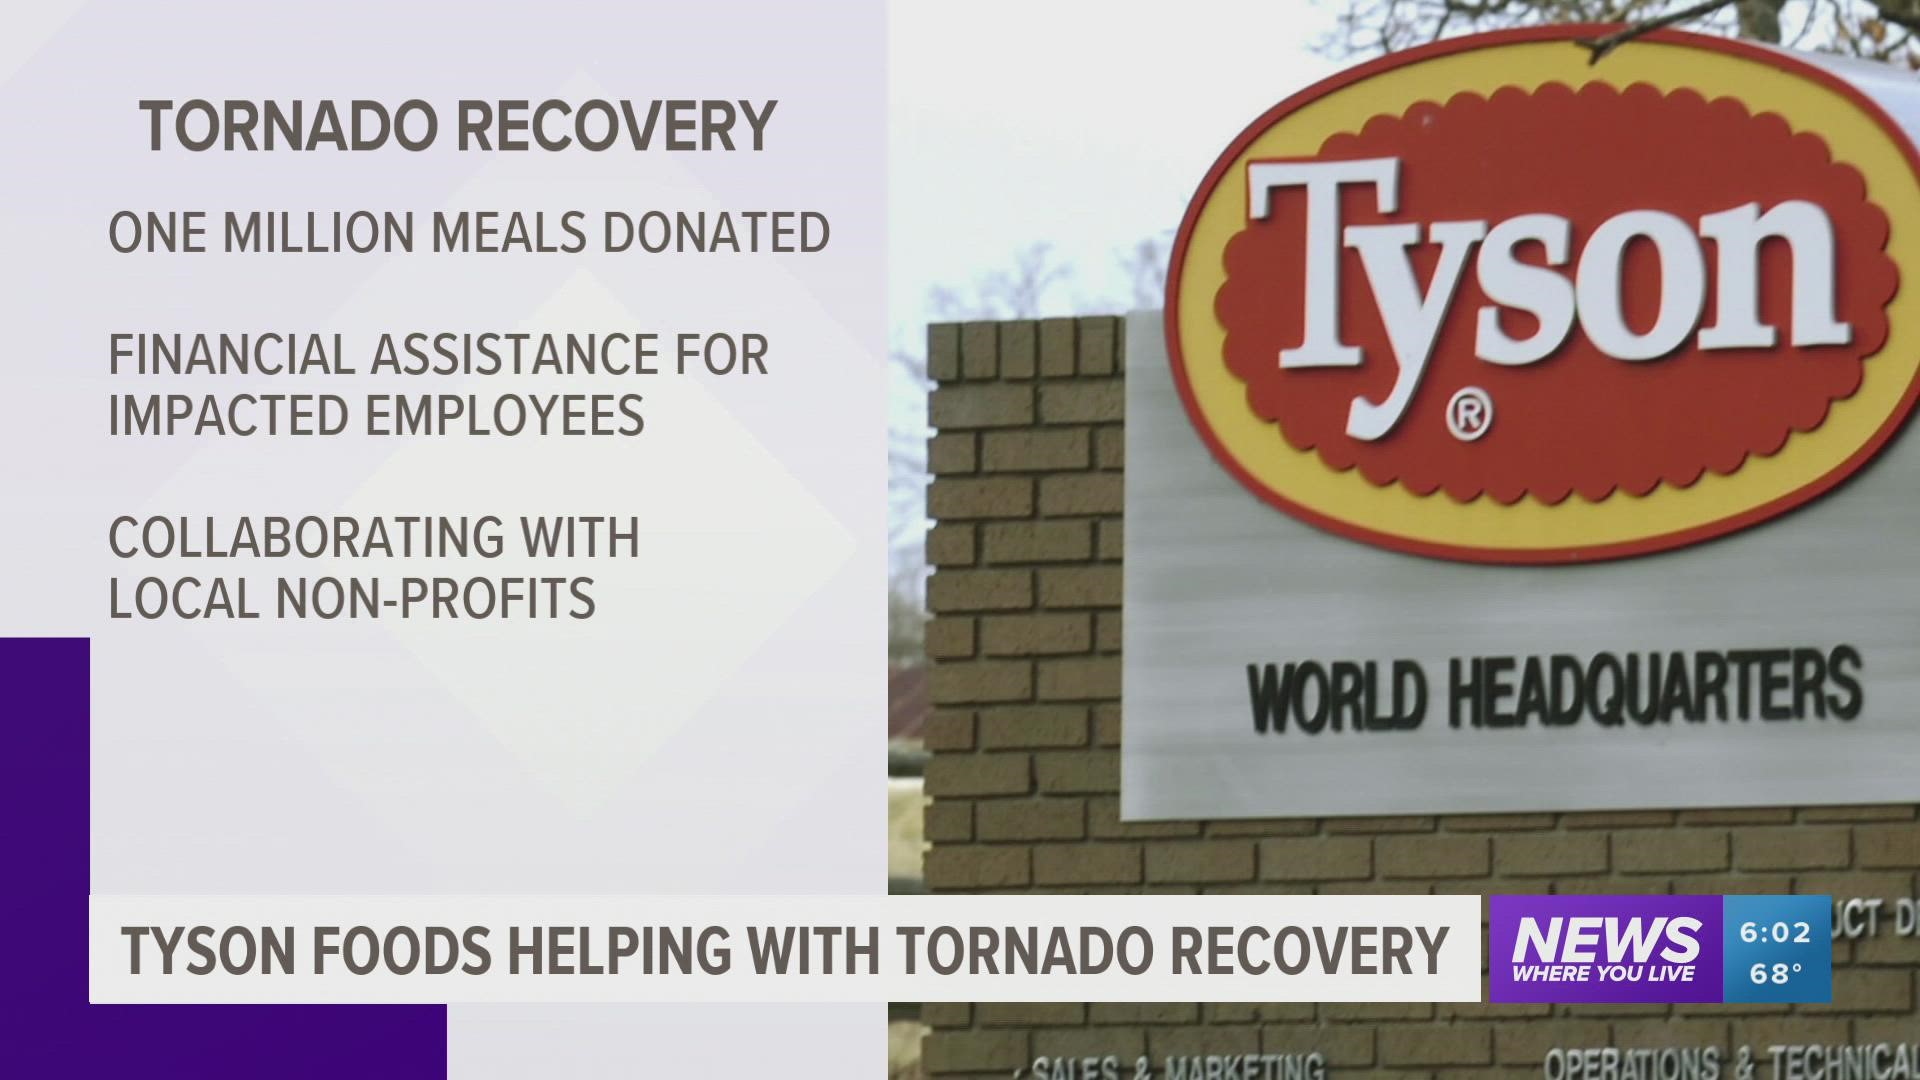 Volunteers throughout Northwest Arkansas are helping distribute one million meals donated by Tyson Foods after a tornado ripped through the area.